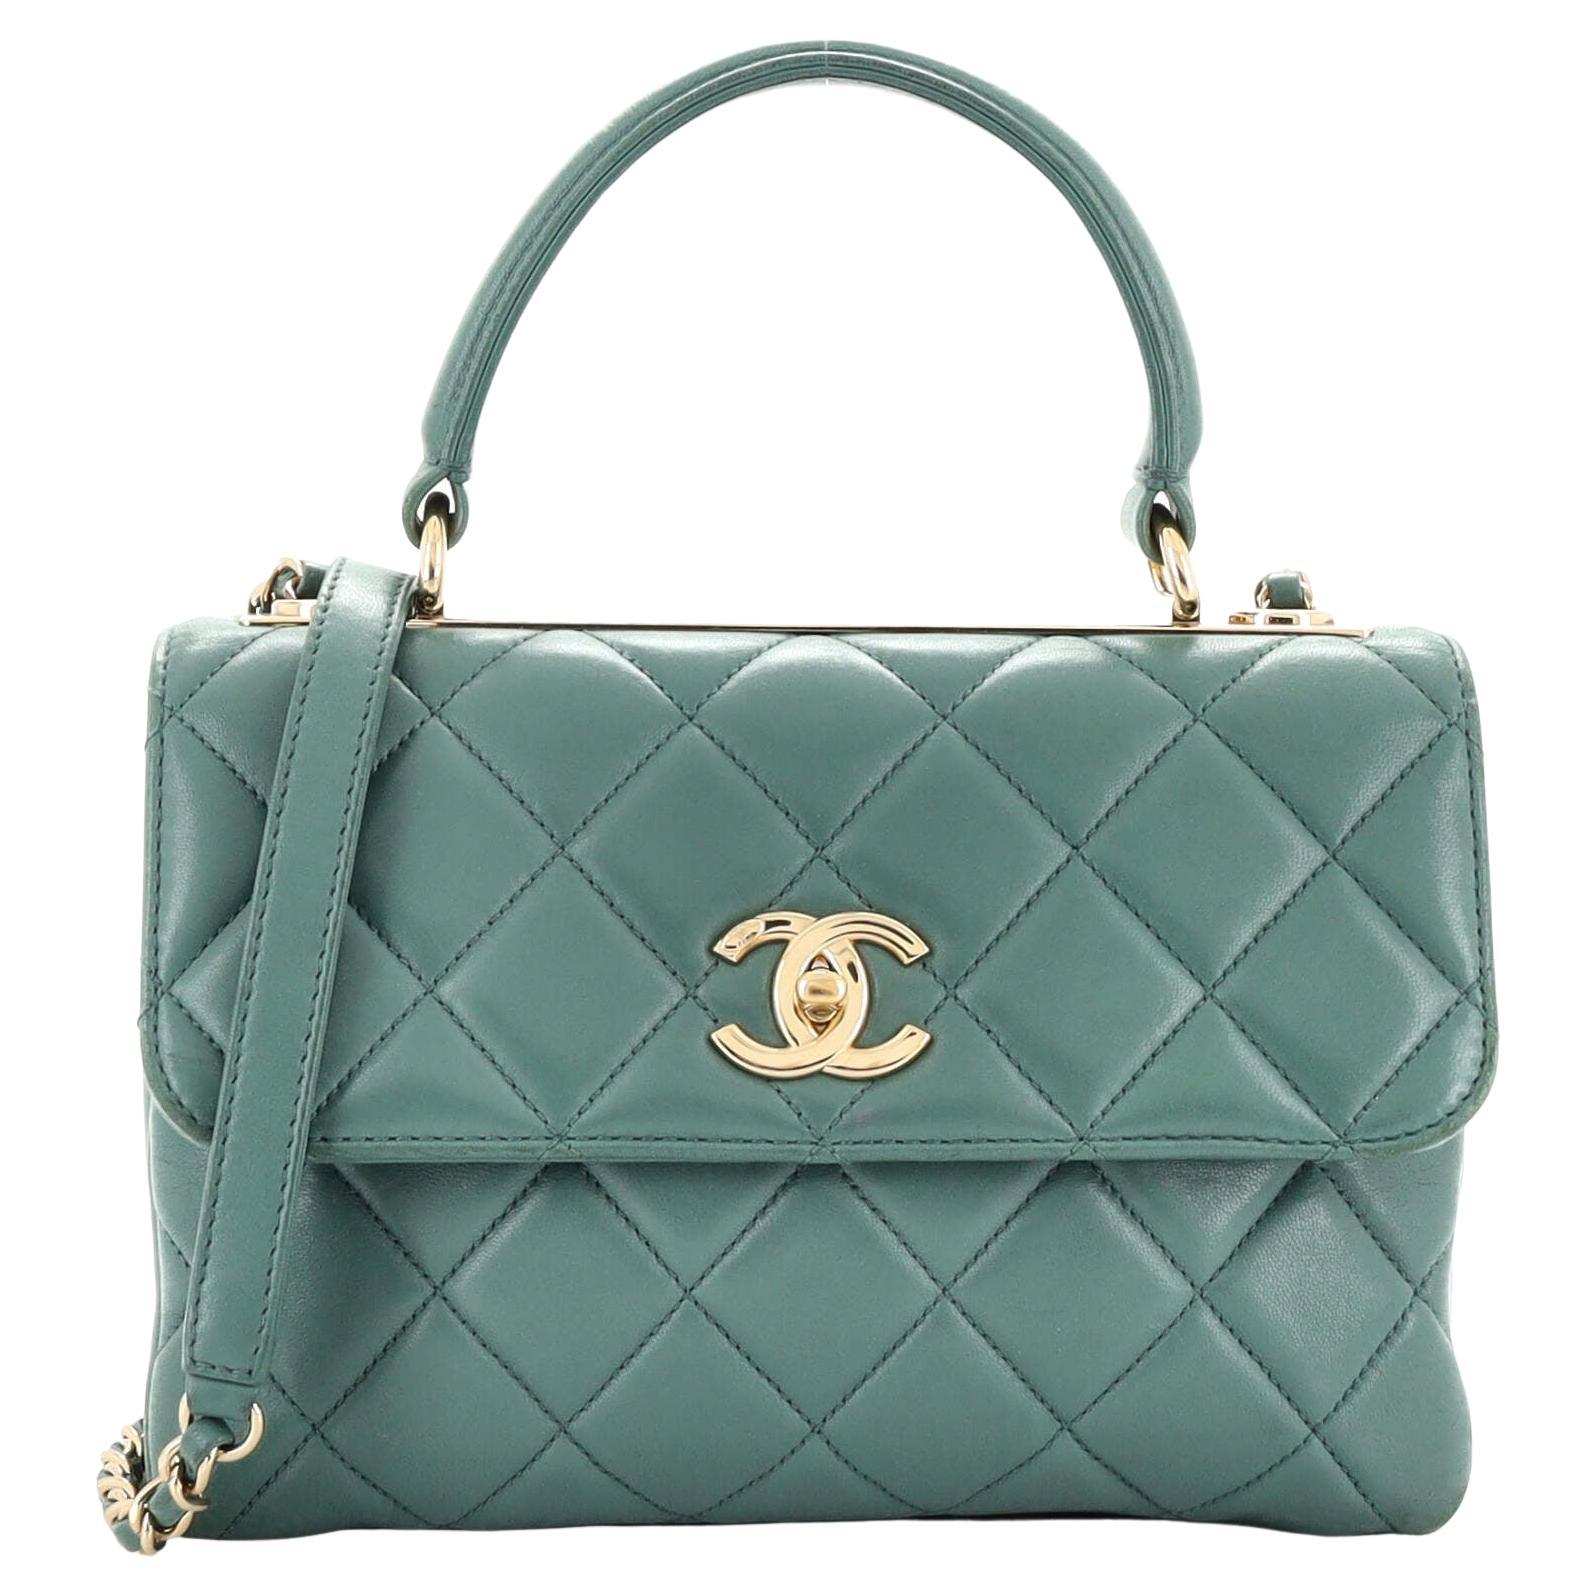 Shop at an Honest Value 100 Celebs and Their Favorite Chanel Bags -  PurseBlog, coco chanel bags sale